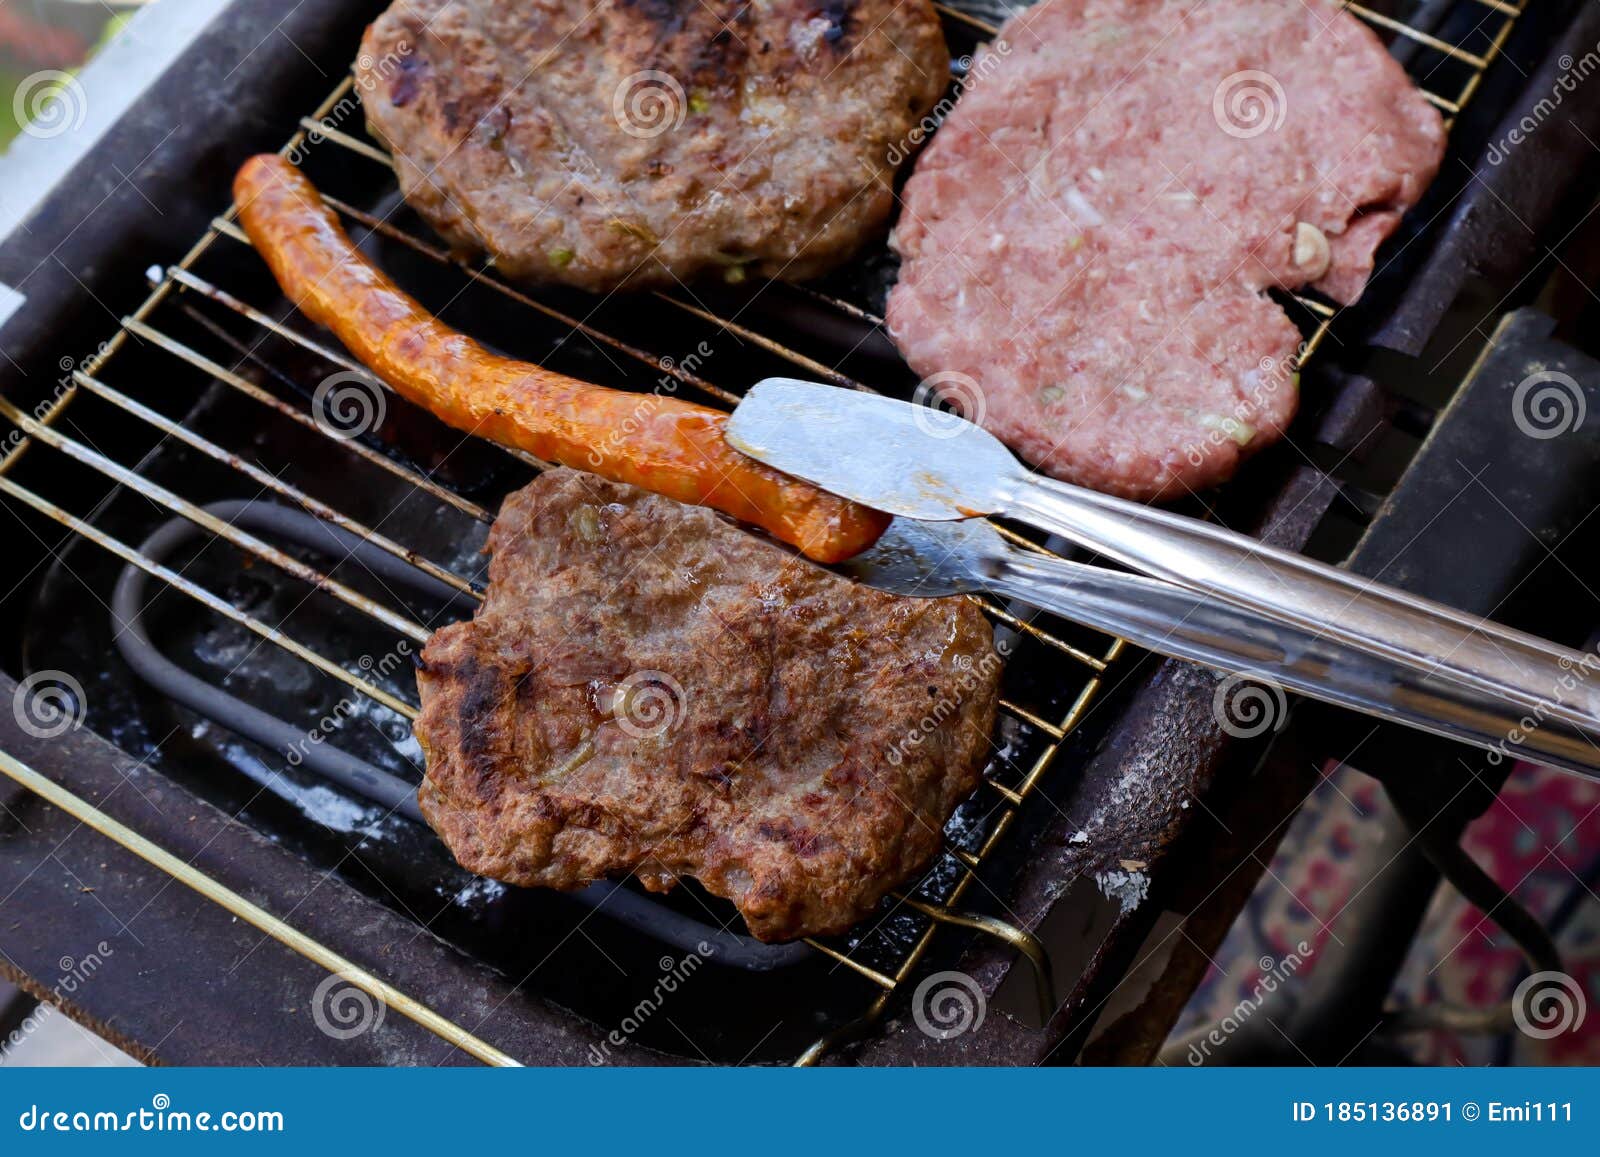 traditional serbian barbecue rostilj  homemade sausages and burgers. preparing a barbecue on a grill, barbecue tong,outdoor roas